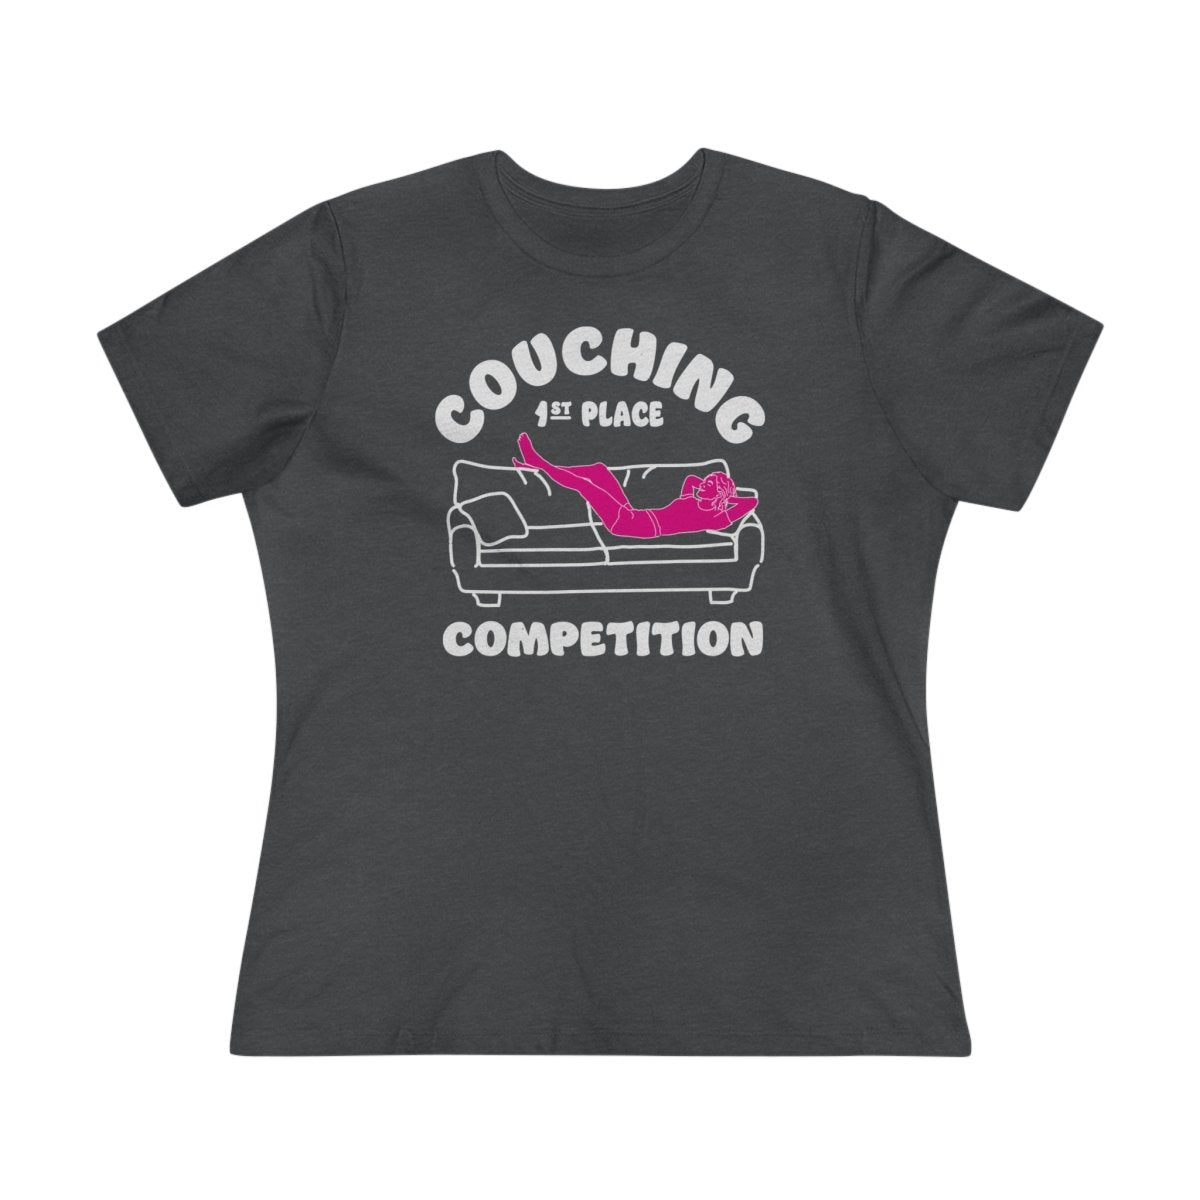 Couching Women's Premium Relaxed Fit T-Shirt, Recharge Competition, Inspire Relaxation, Weekend, Couch Potato